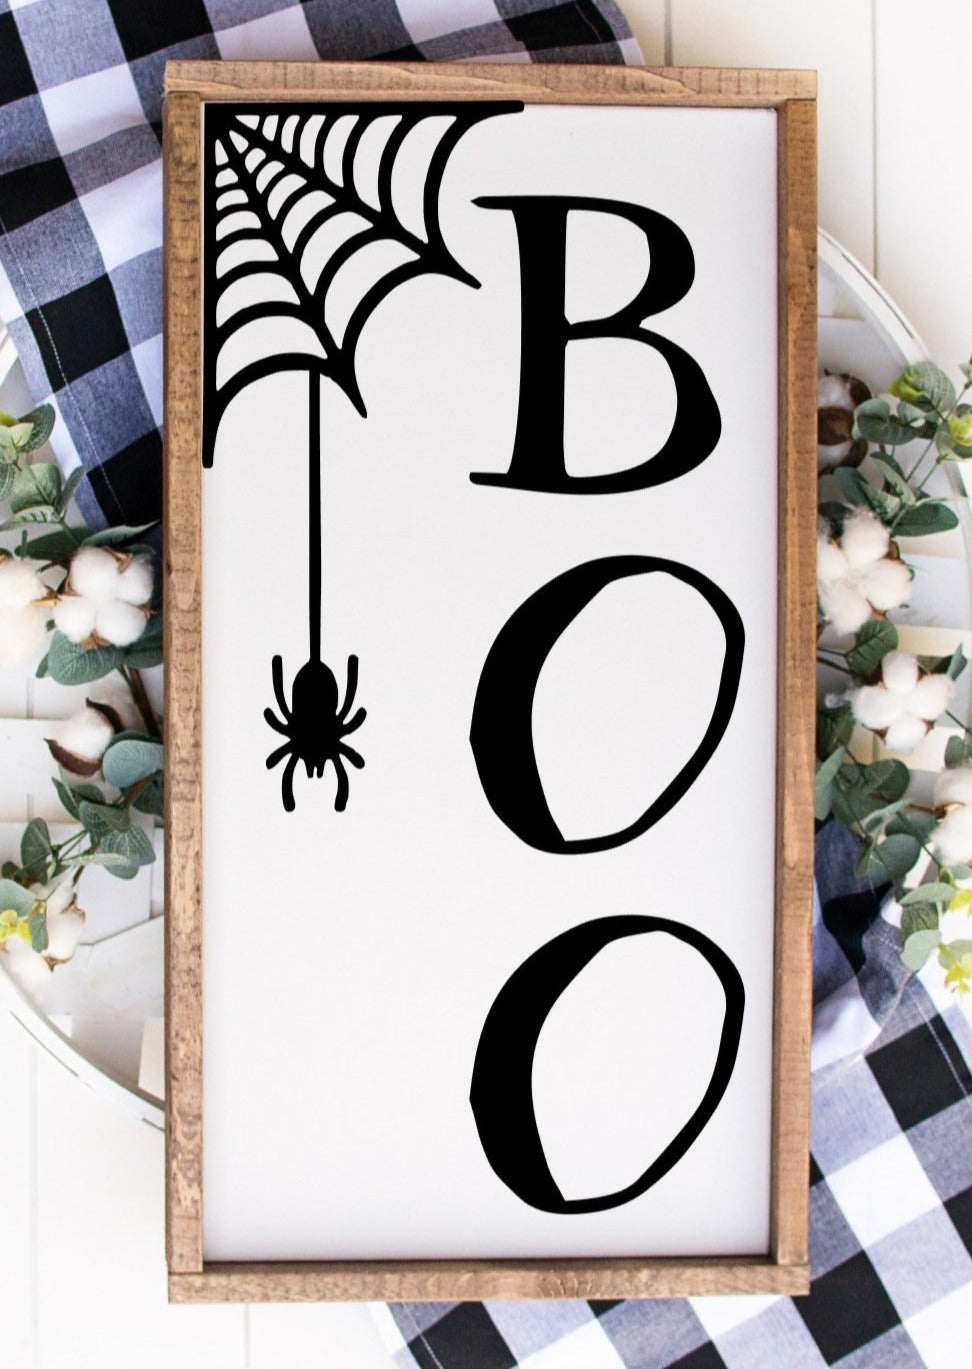 Boo Halloween handmade painted wood sign with spider and web